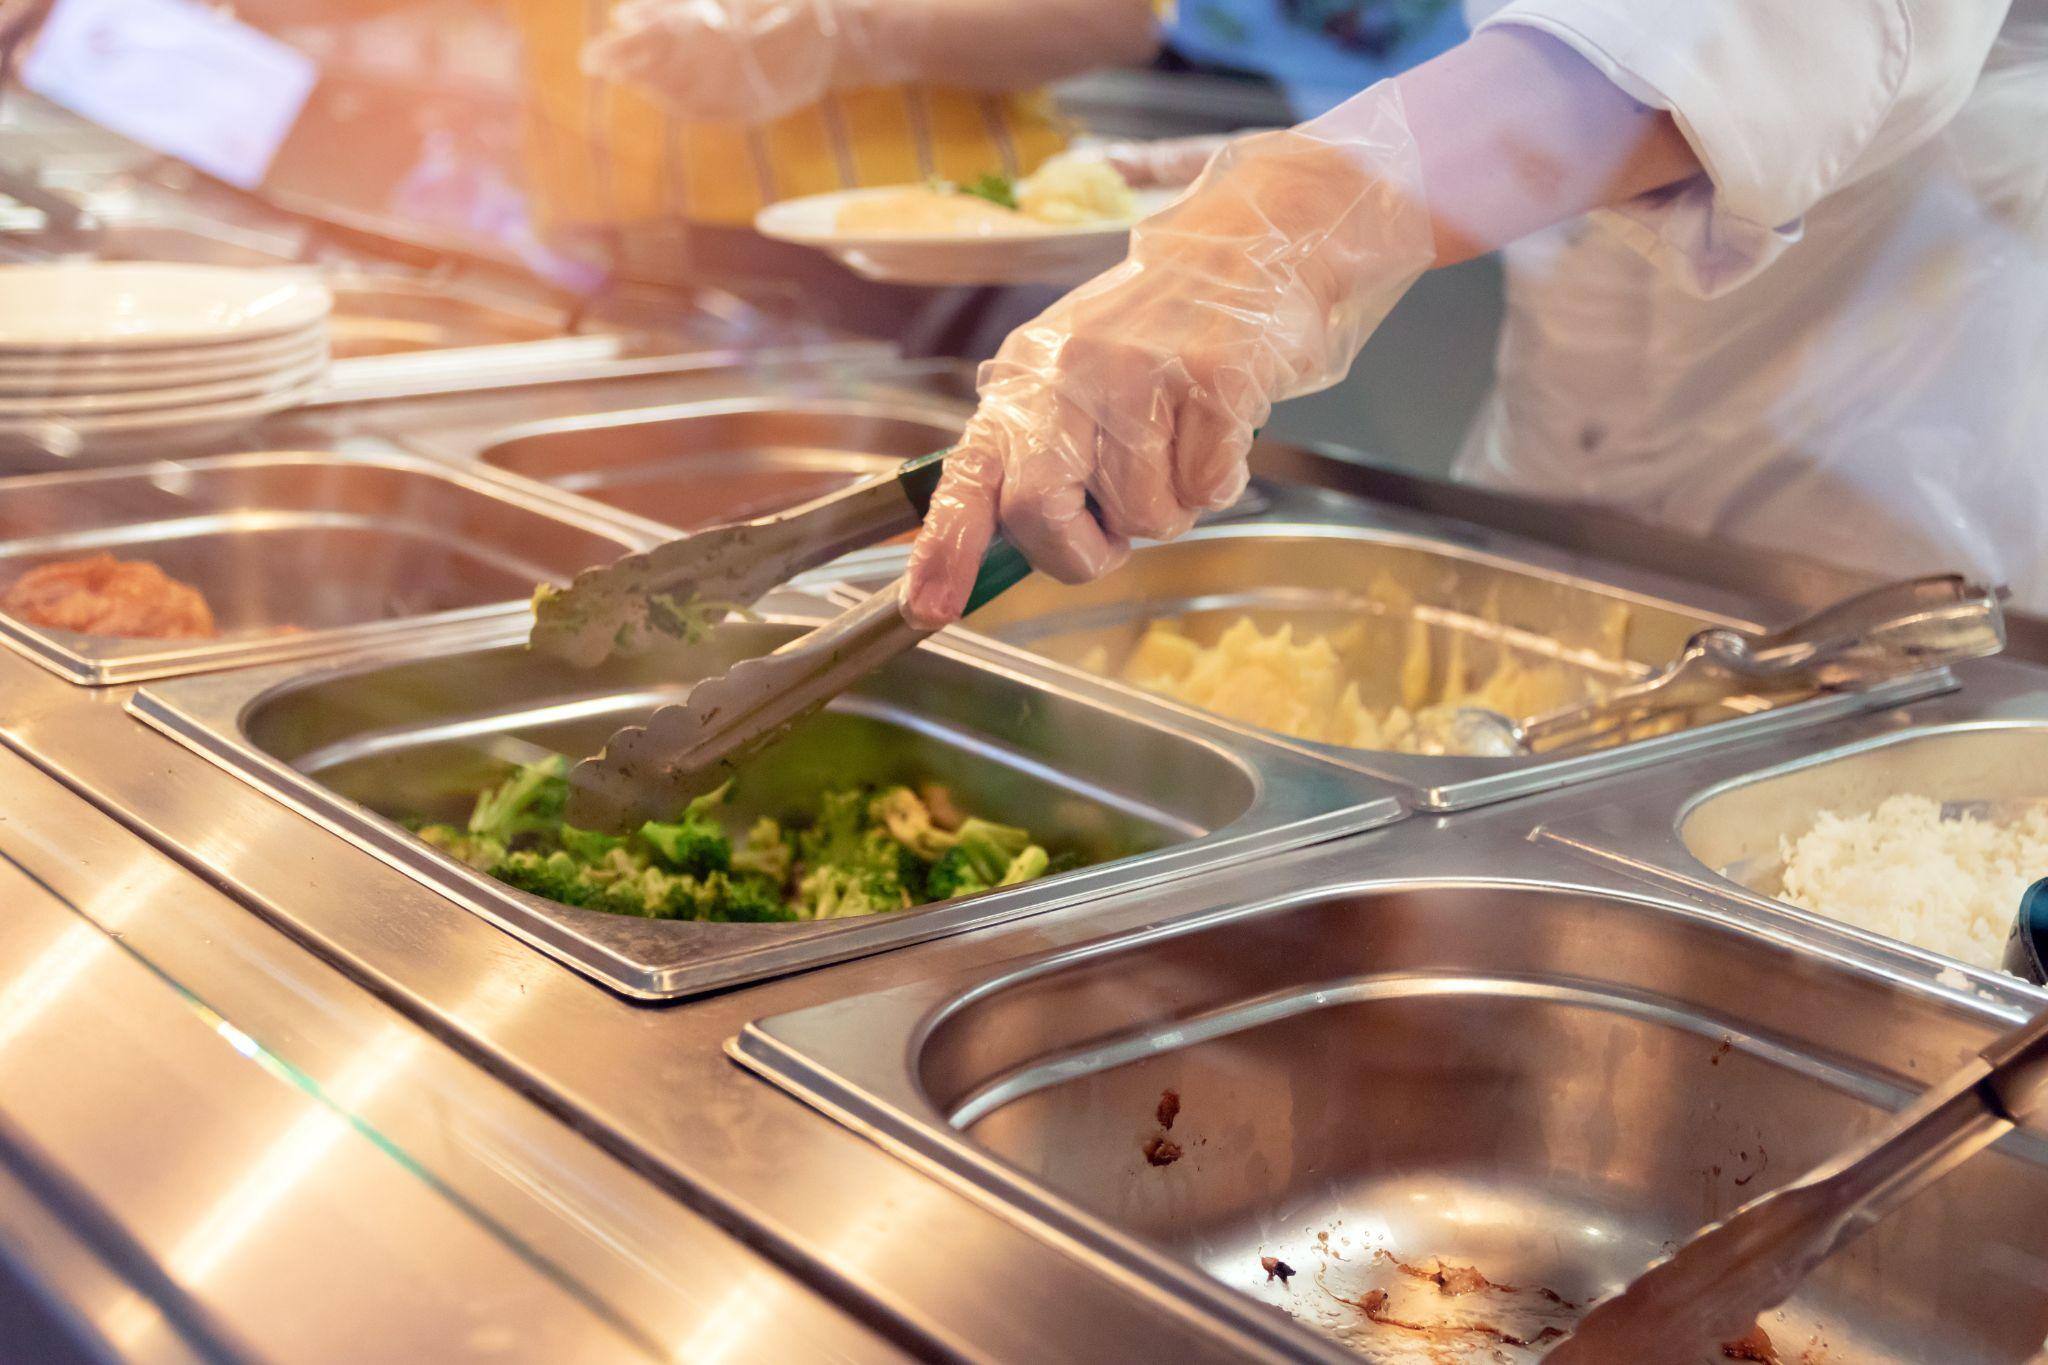 food safety hazards in student meals